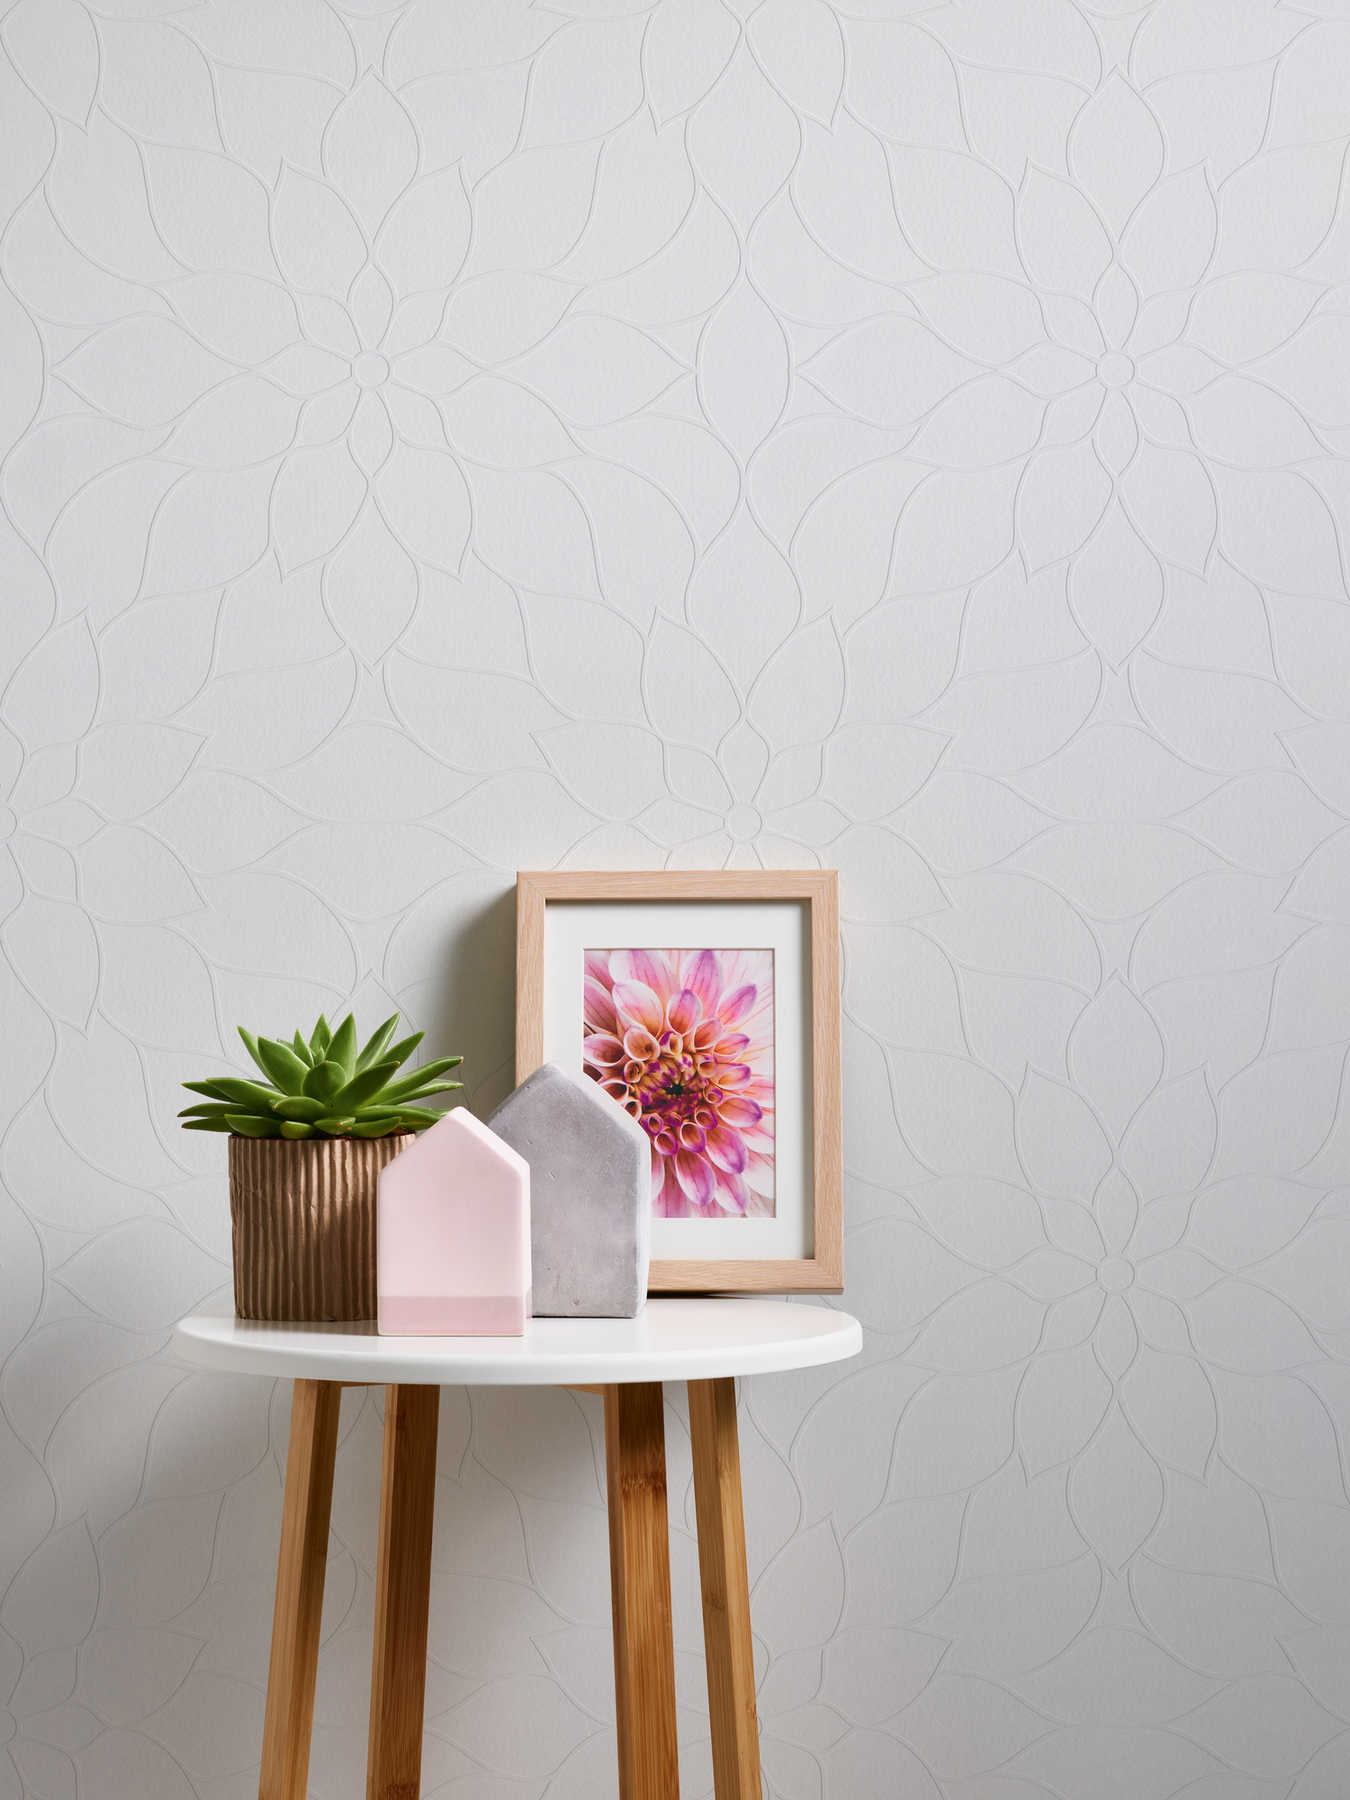             Paintable wallpaper with modern floral design
        